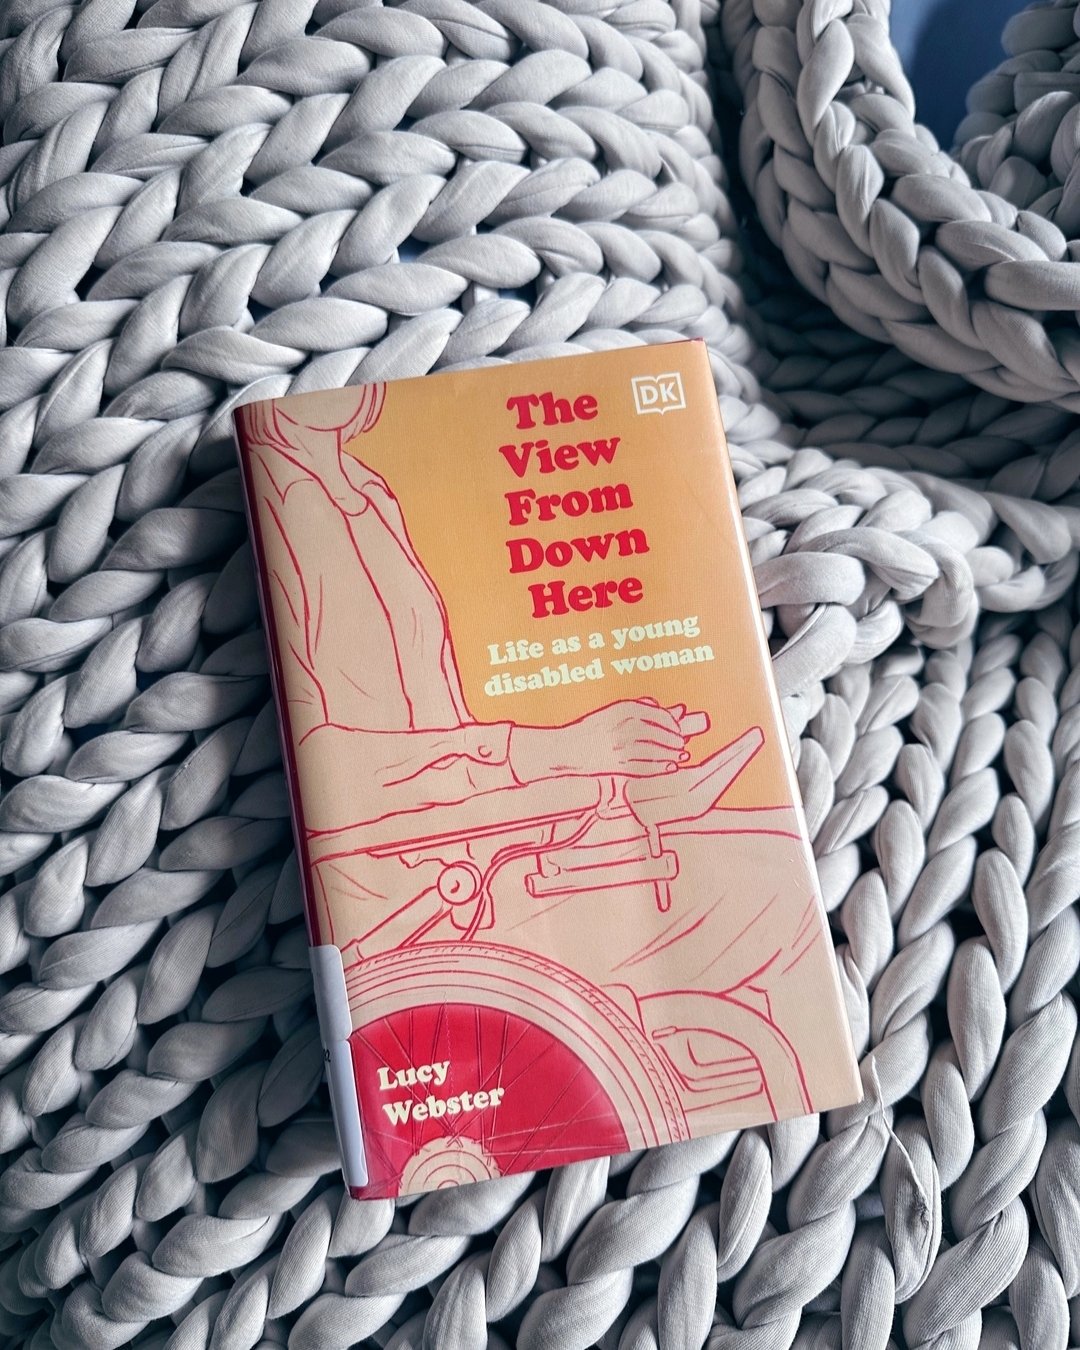 Drop an emoji in the comments if you love book browsing! 📚 I found this wonderful book, The View From Down Here, by Lucy Webster, when I was wandering through the library's bookshelves. 

And I'm so glad I found it- definitely a 5-star read for me a